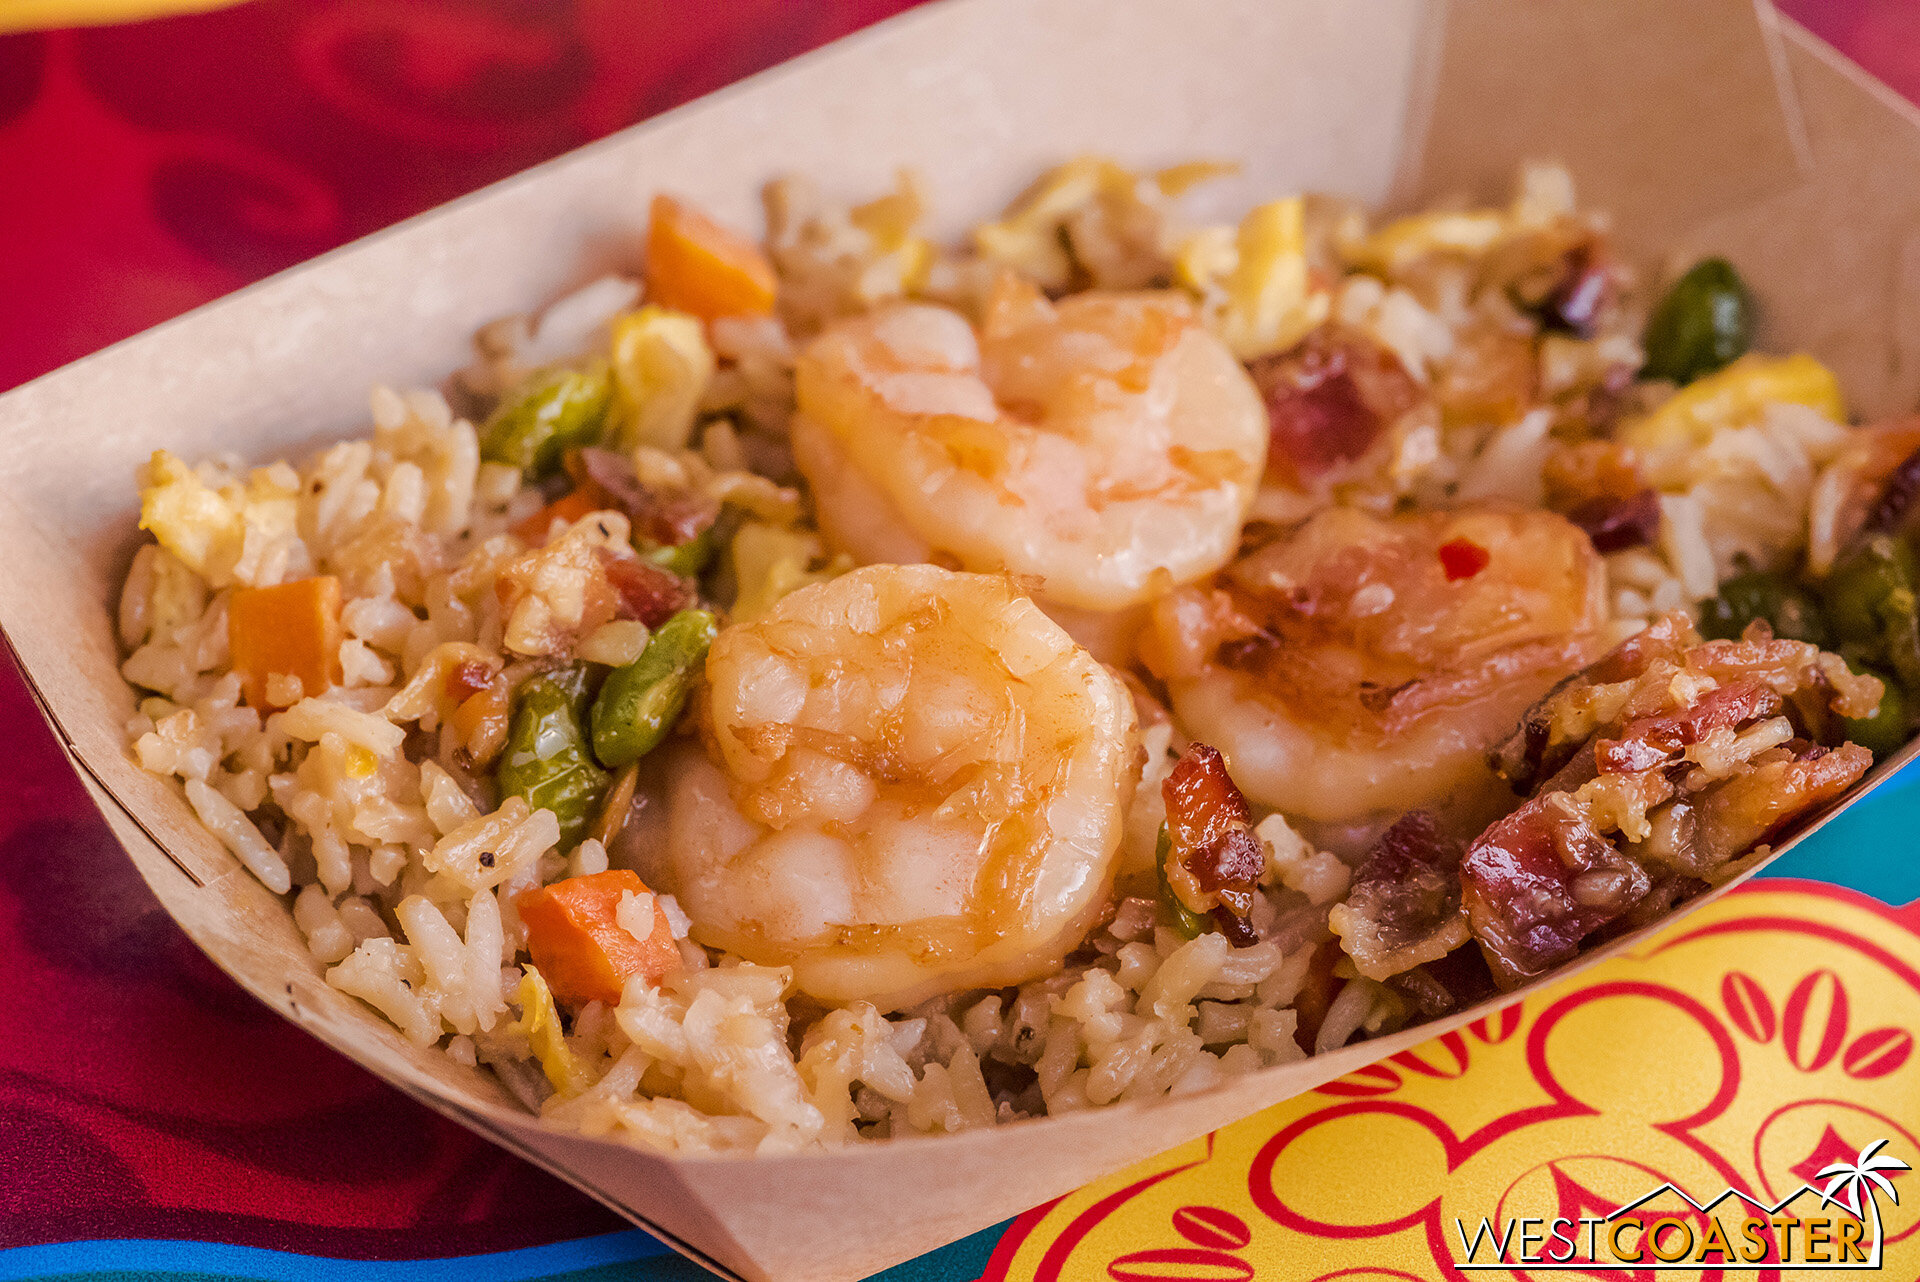  The Shrimp Fried Rice was delicious, especially with the garlic bacon umami taste to it! 